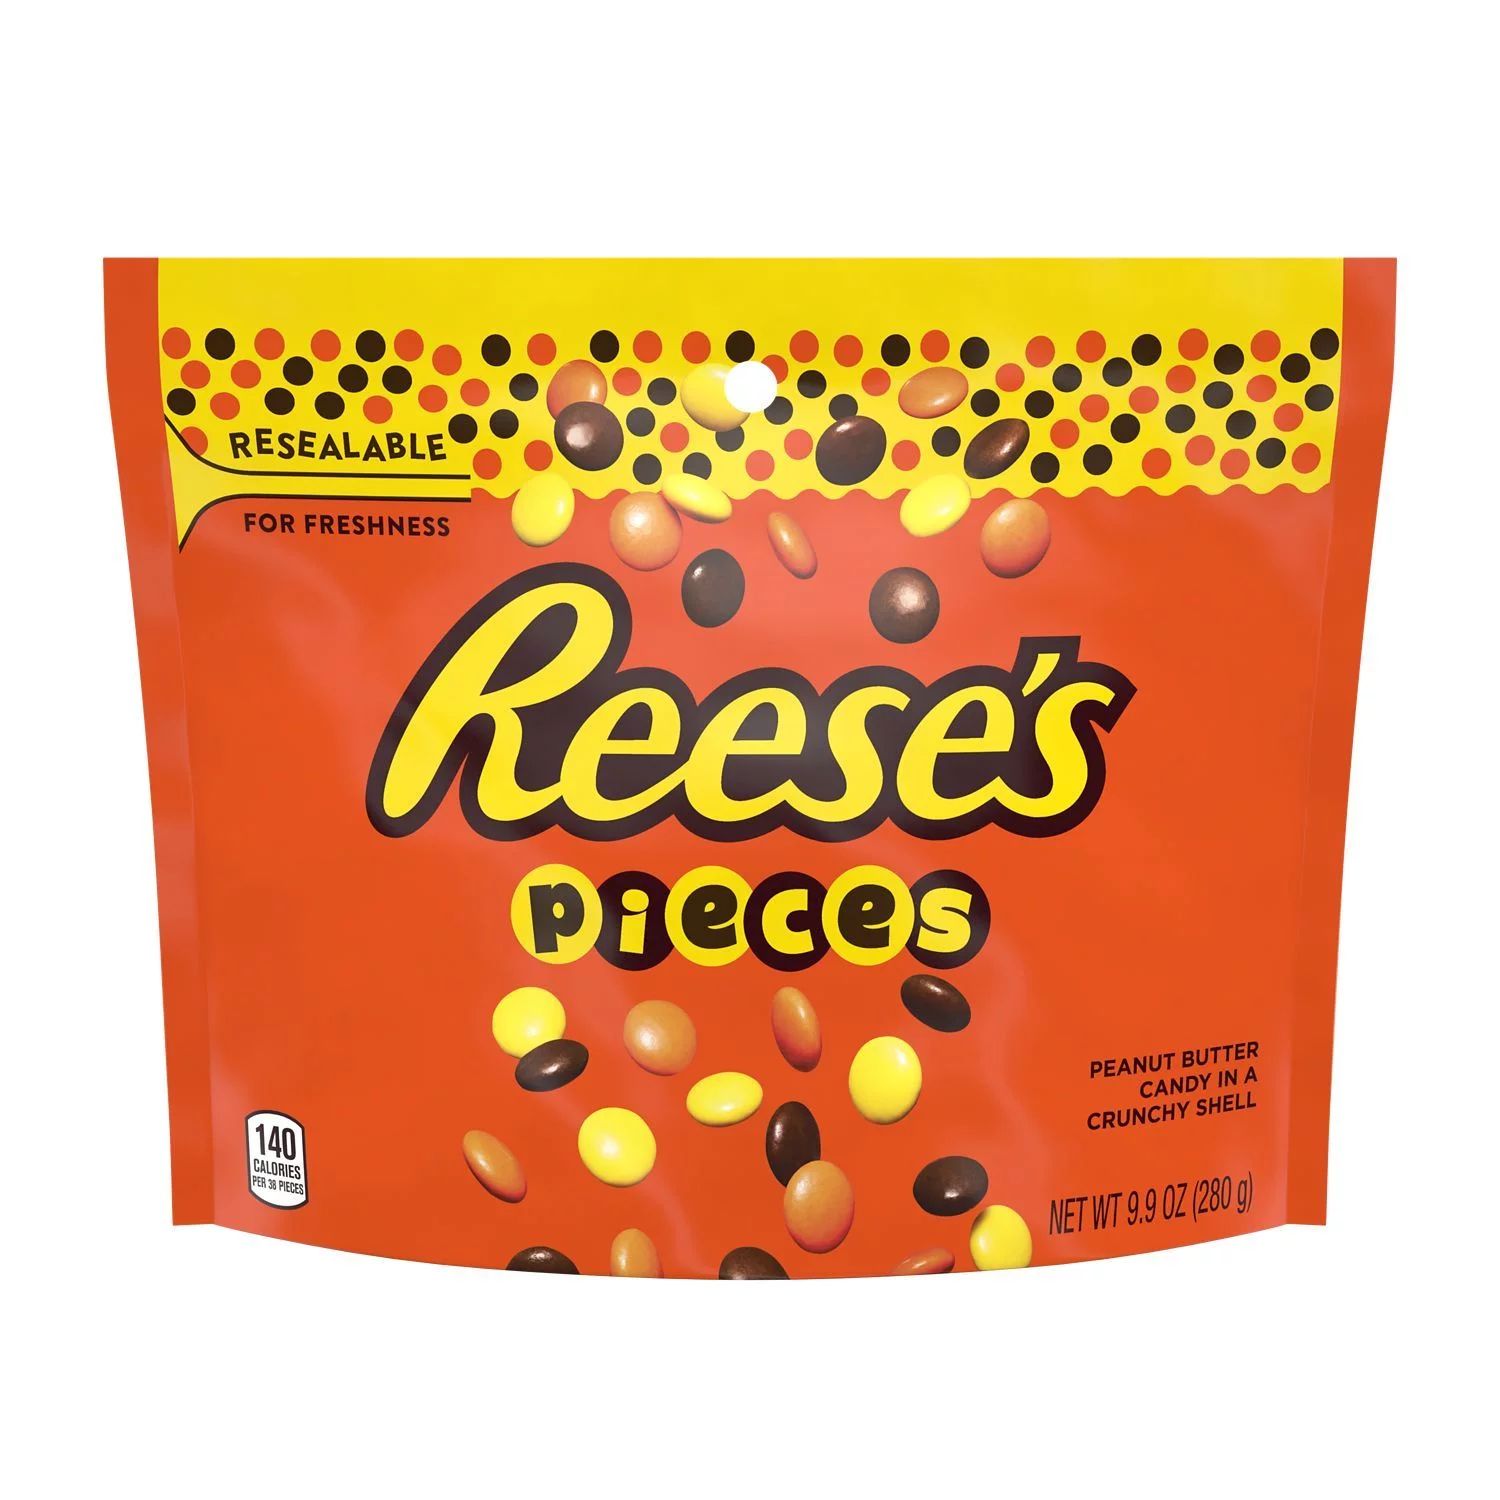 Reese's, Pieces Peanut Butter in a Crunchy Shell Candy, Gluten Free, 9.9 oz, Resealable Bag | Walmart (US)